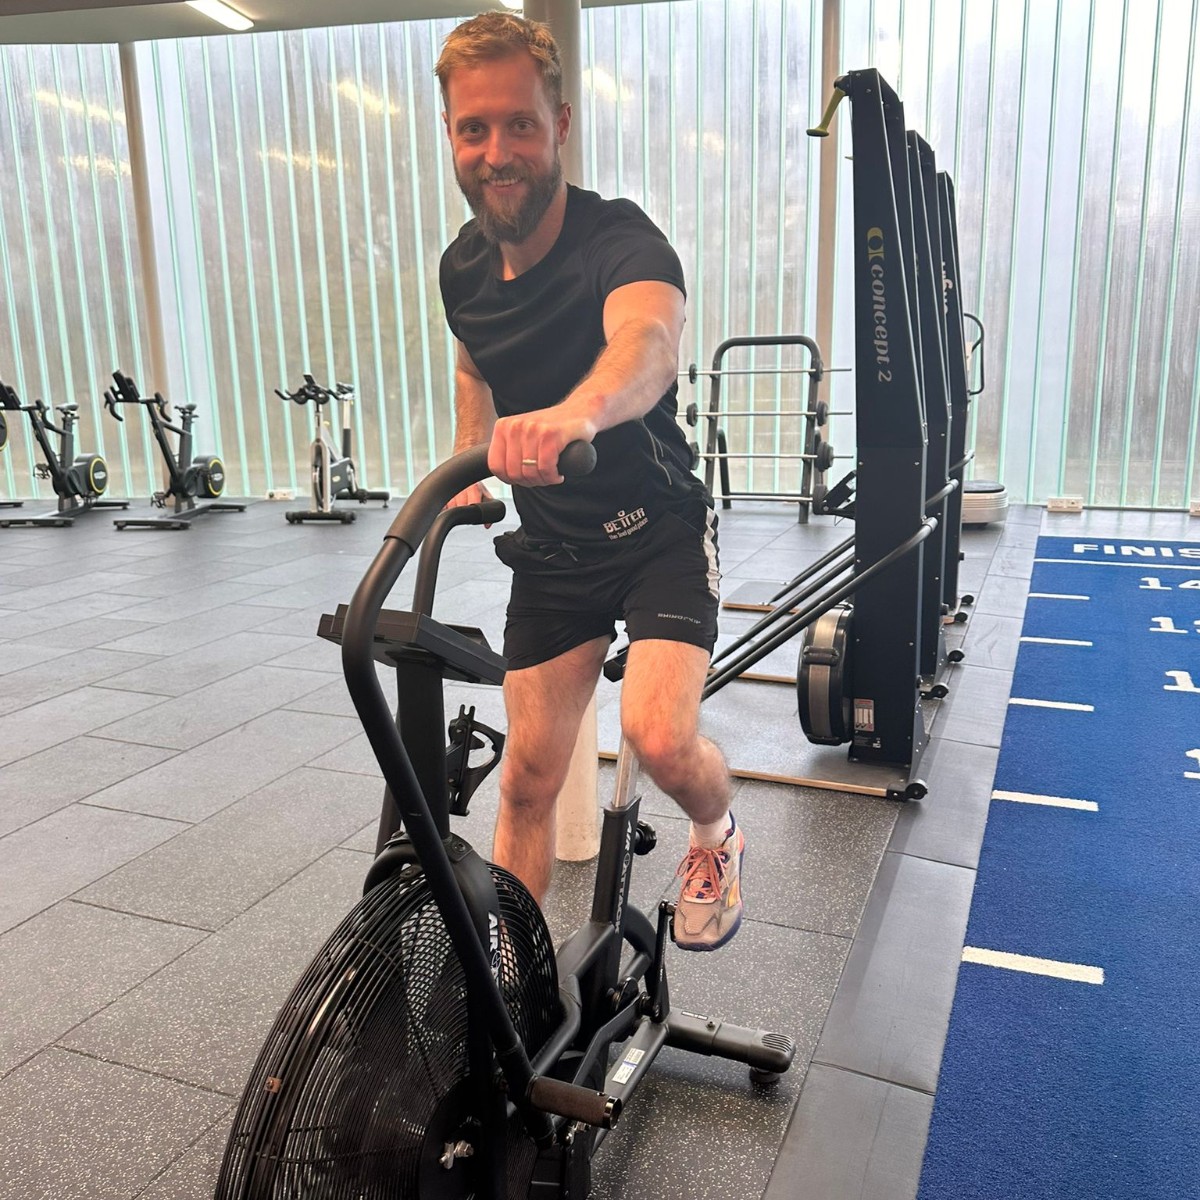 Fitness Challenge Of The Month - How quickly can you cycle 1 Kilometre on the Assault Bike? Can you beat the Fitness Team? Record your time on the leader board in the gym. Good luck.